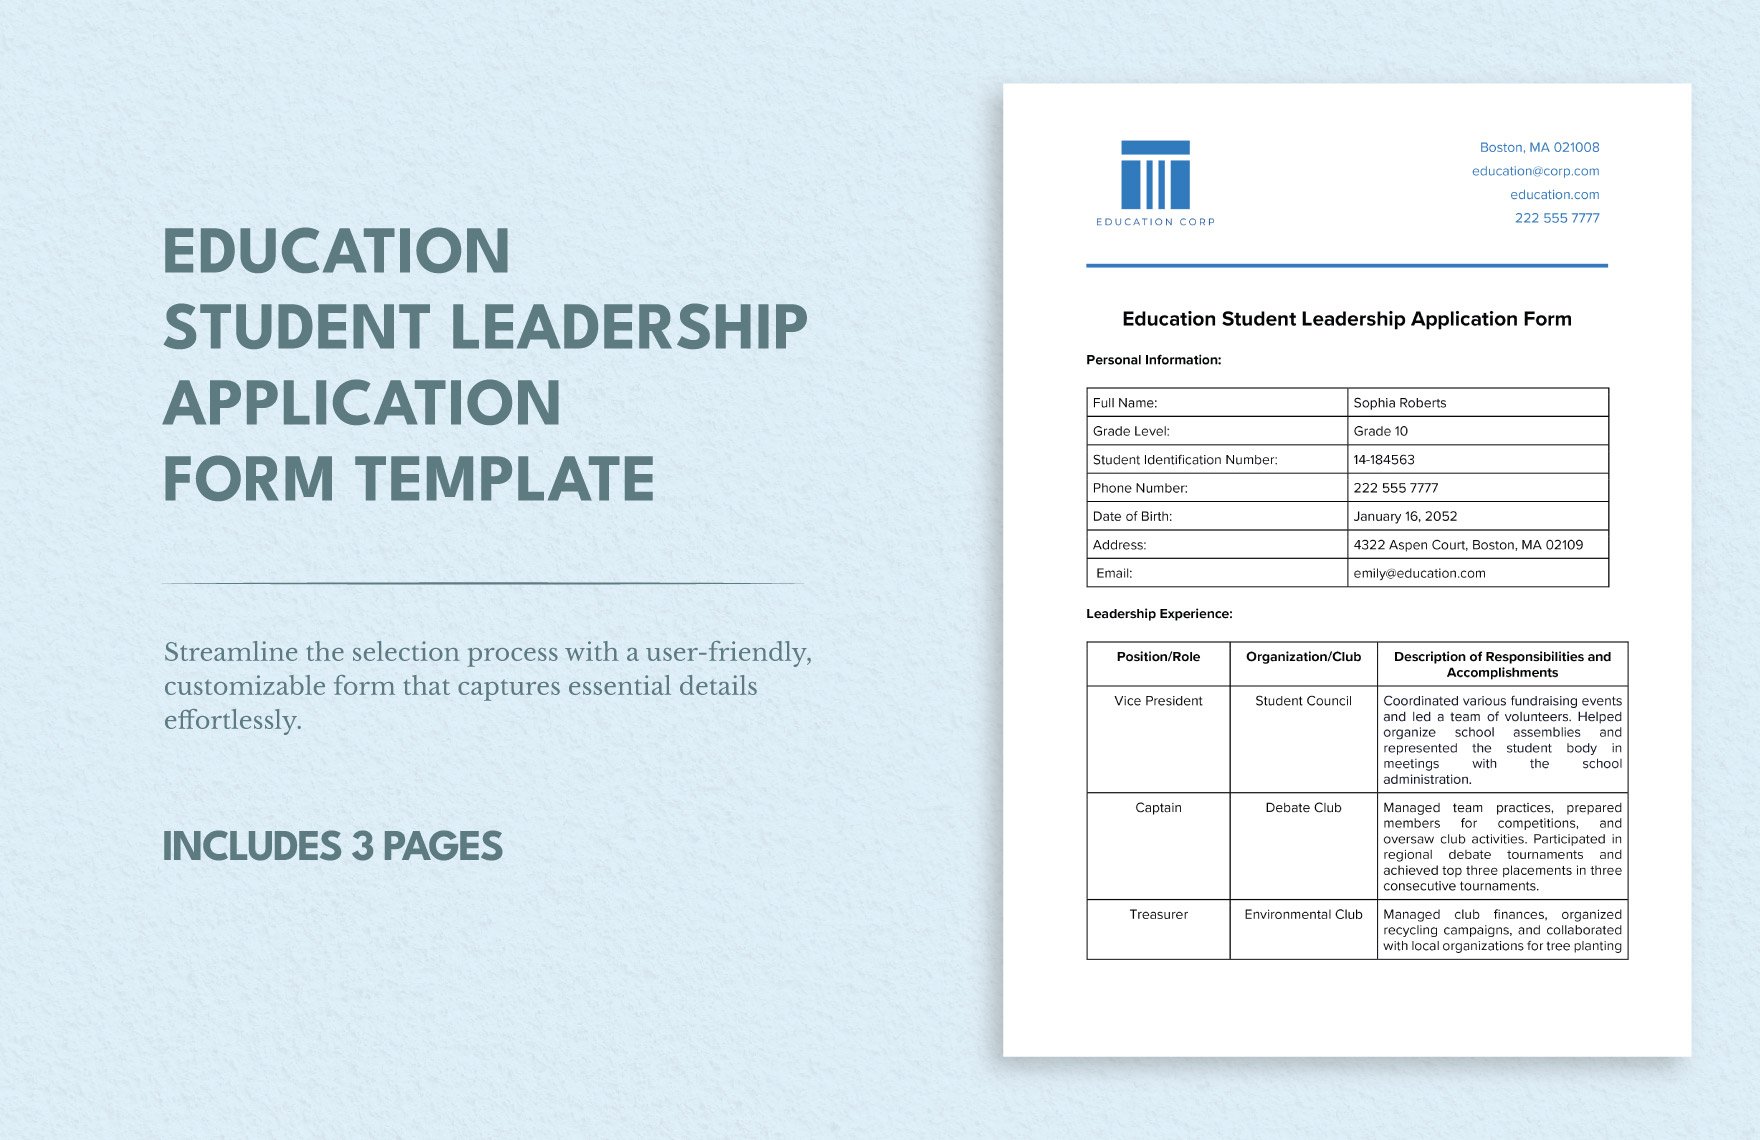 Education Student Leadership Application Form Template in Word, Google Docs, PDF